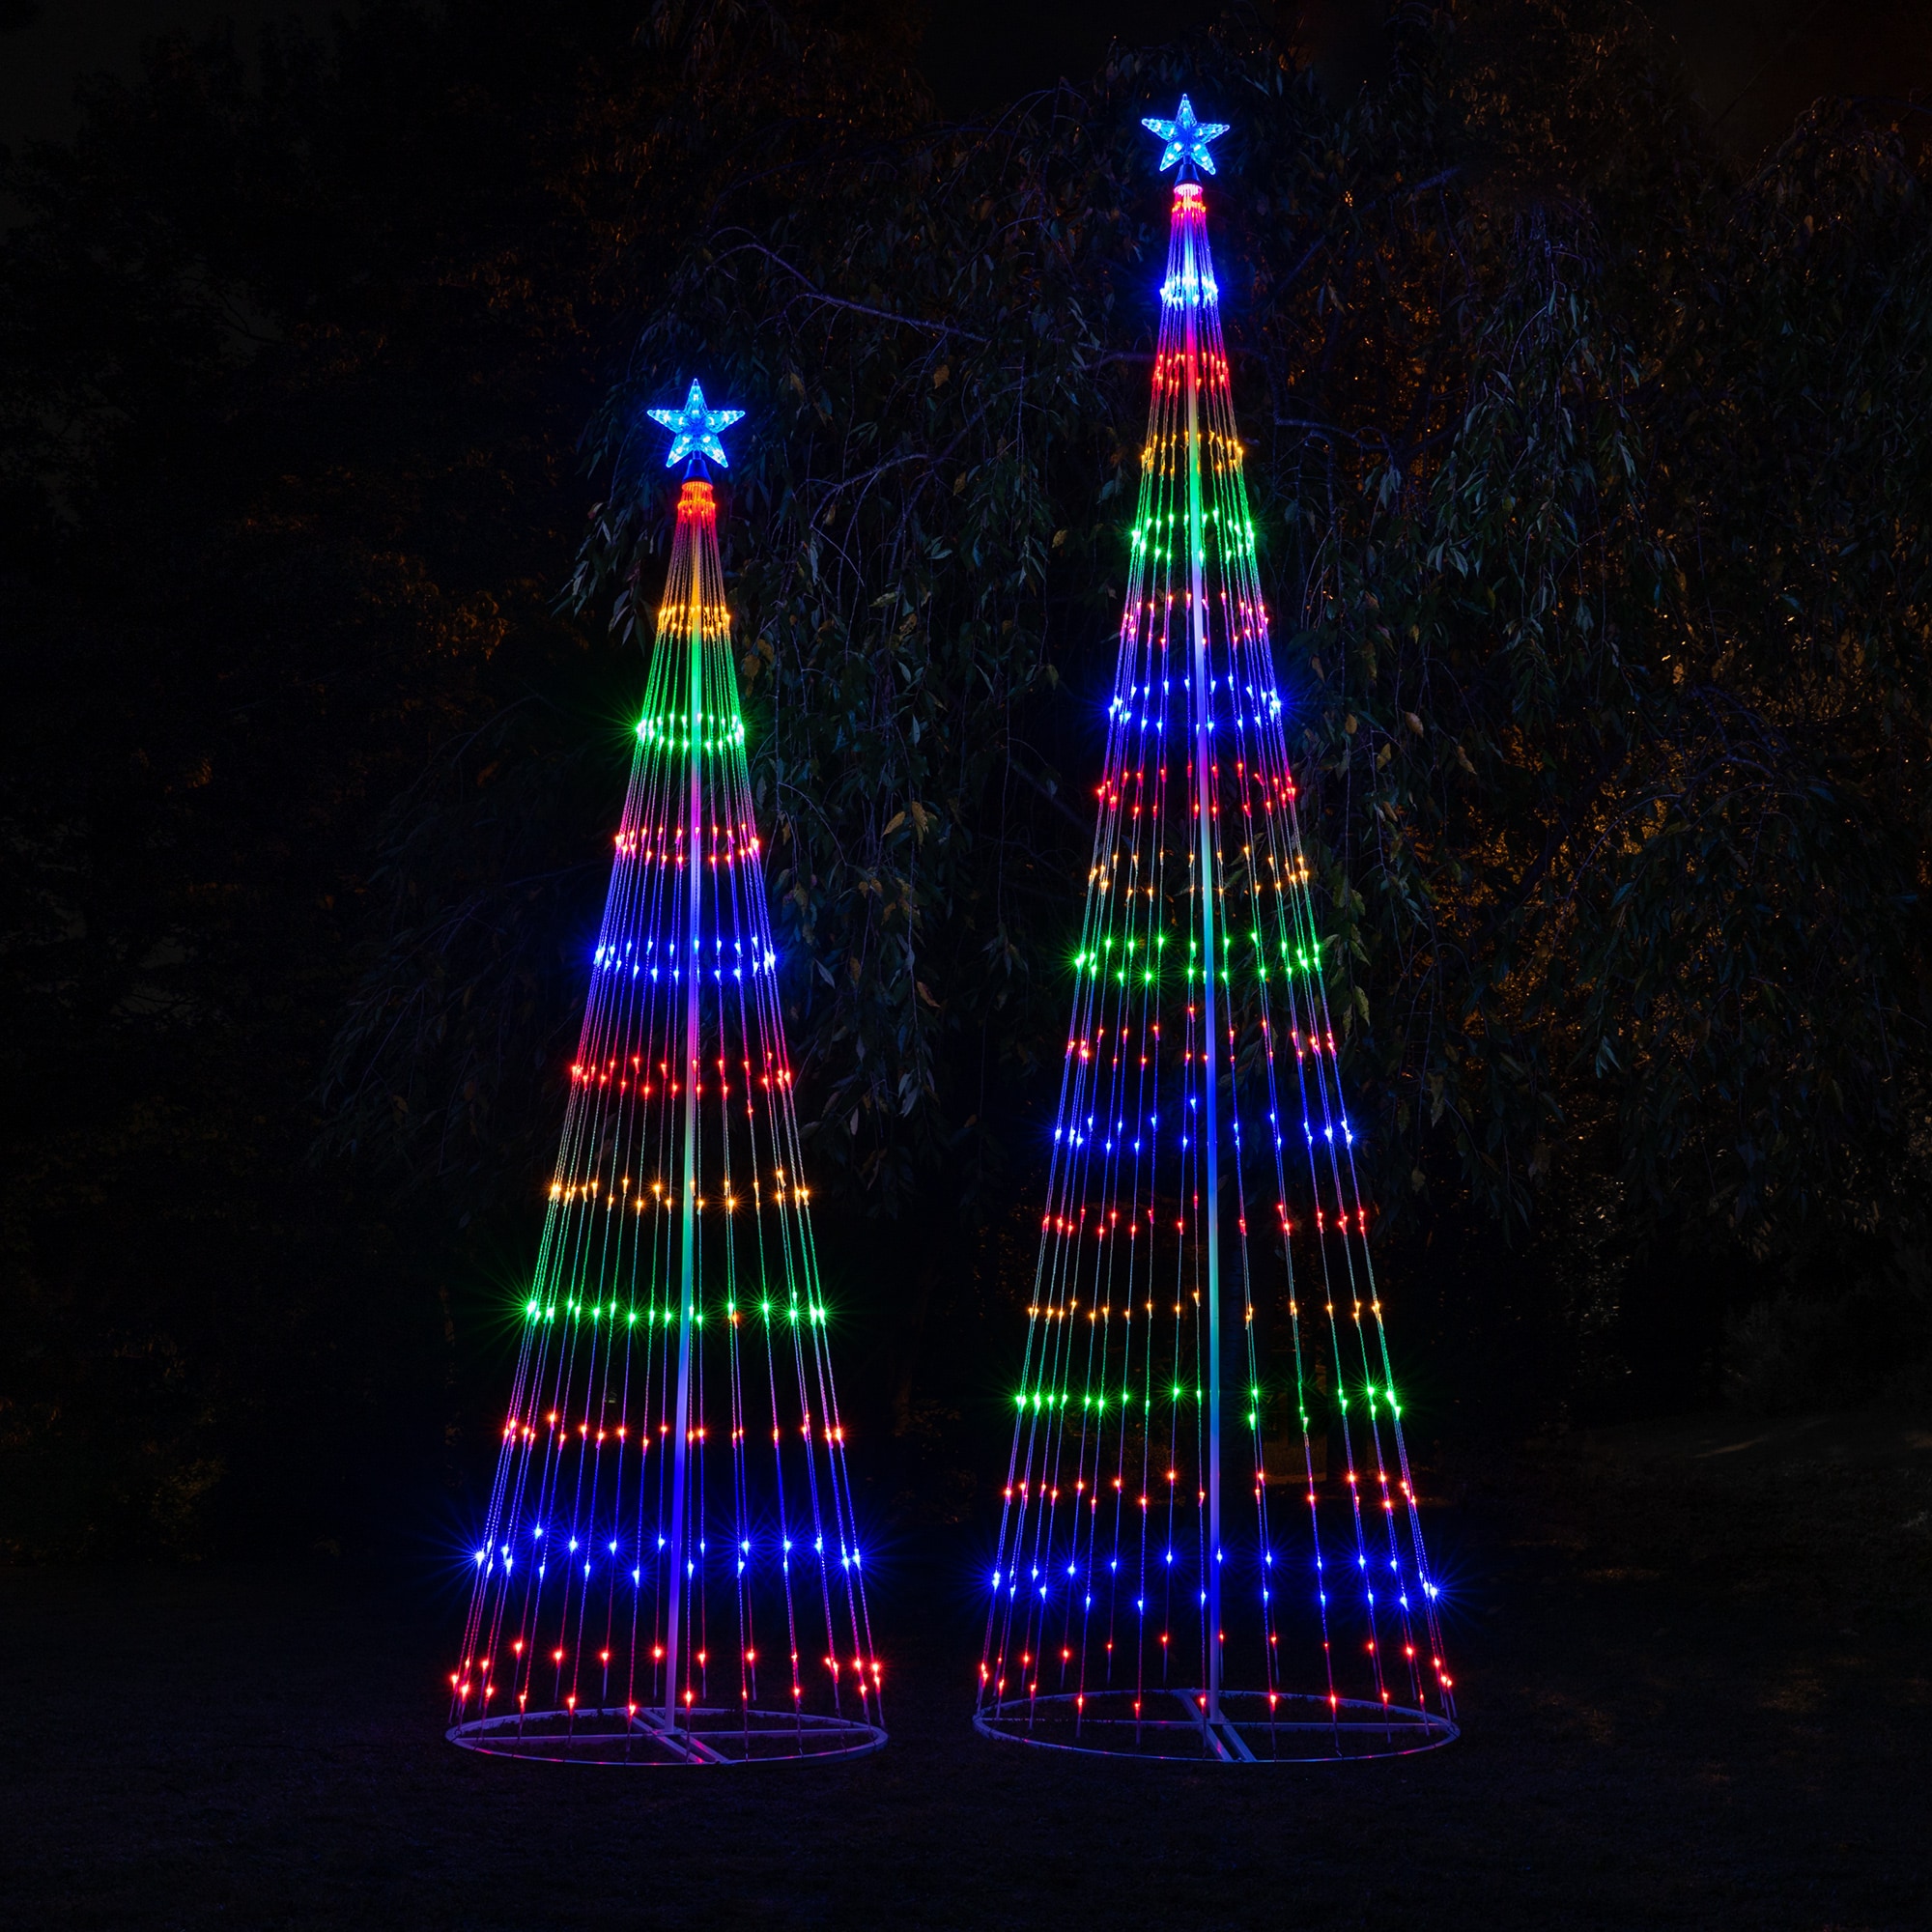 LED Outdoor Christmas Light Show Motion Tree Multi Color 3D Display Decor NEW 